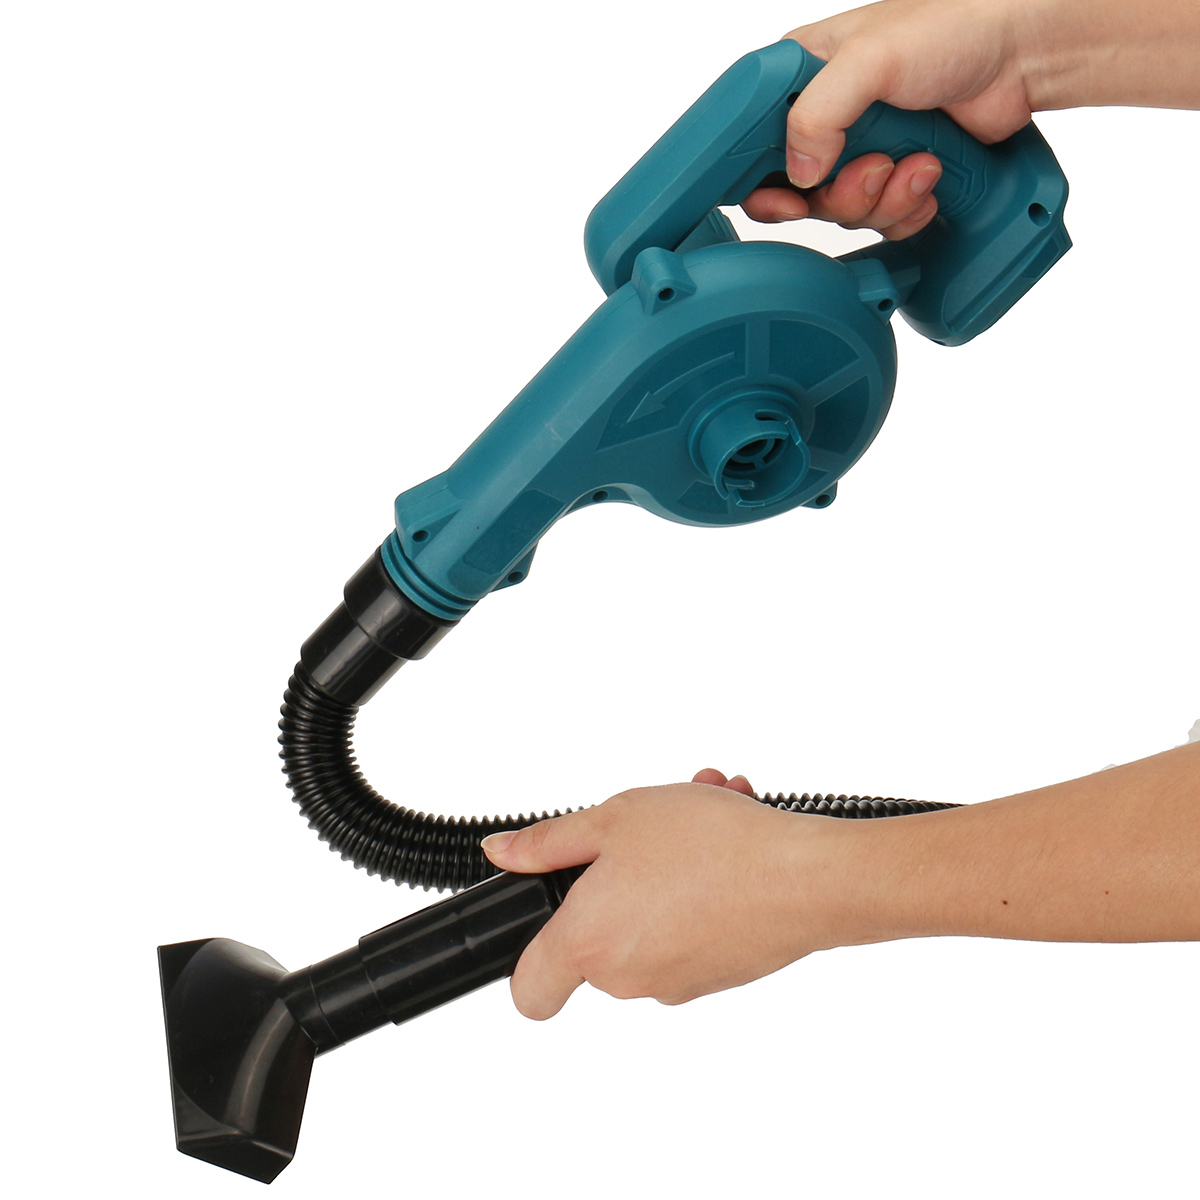 VIOLEWORKS-2-in-1-Electric-Air-Blower-Vacuum-Cleaner-Handheld-Dust-Collecting-Tool-For-Makita18V-Bat-1771460-8